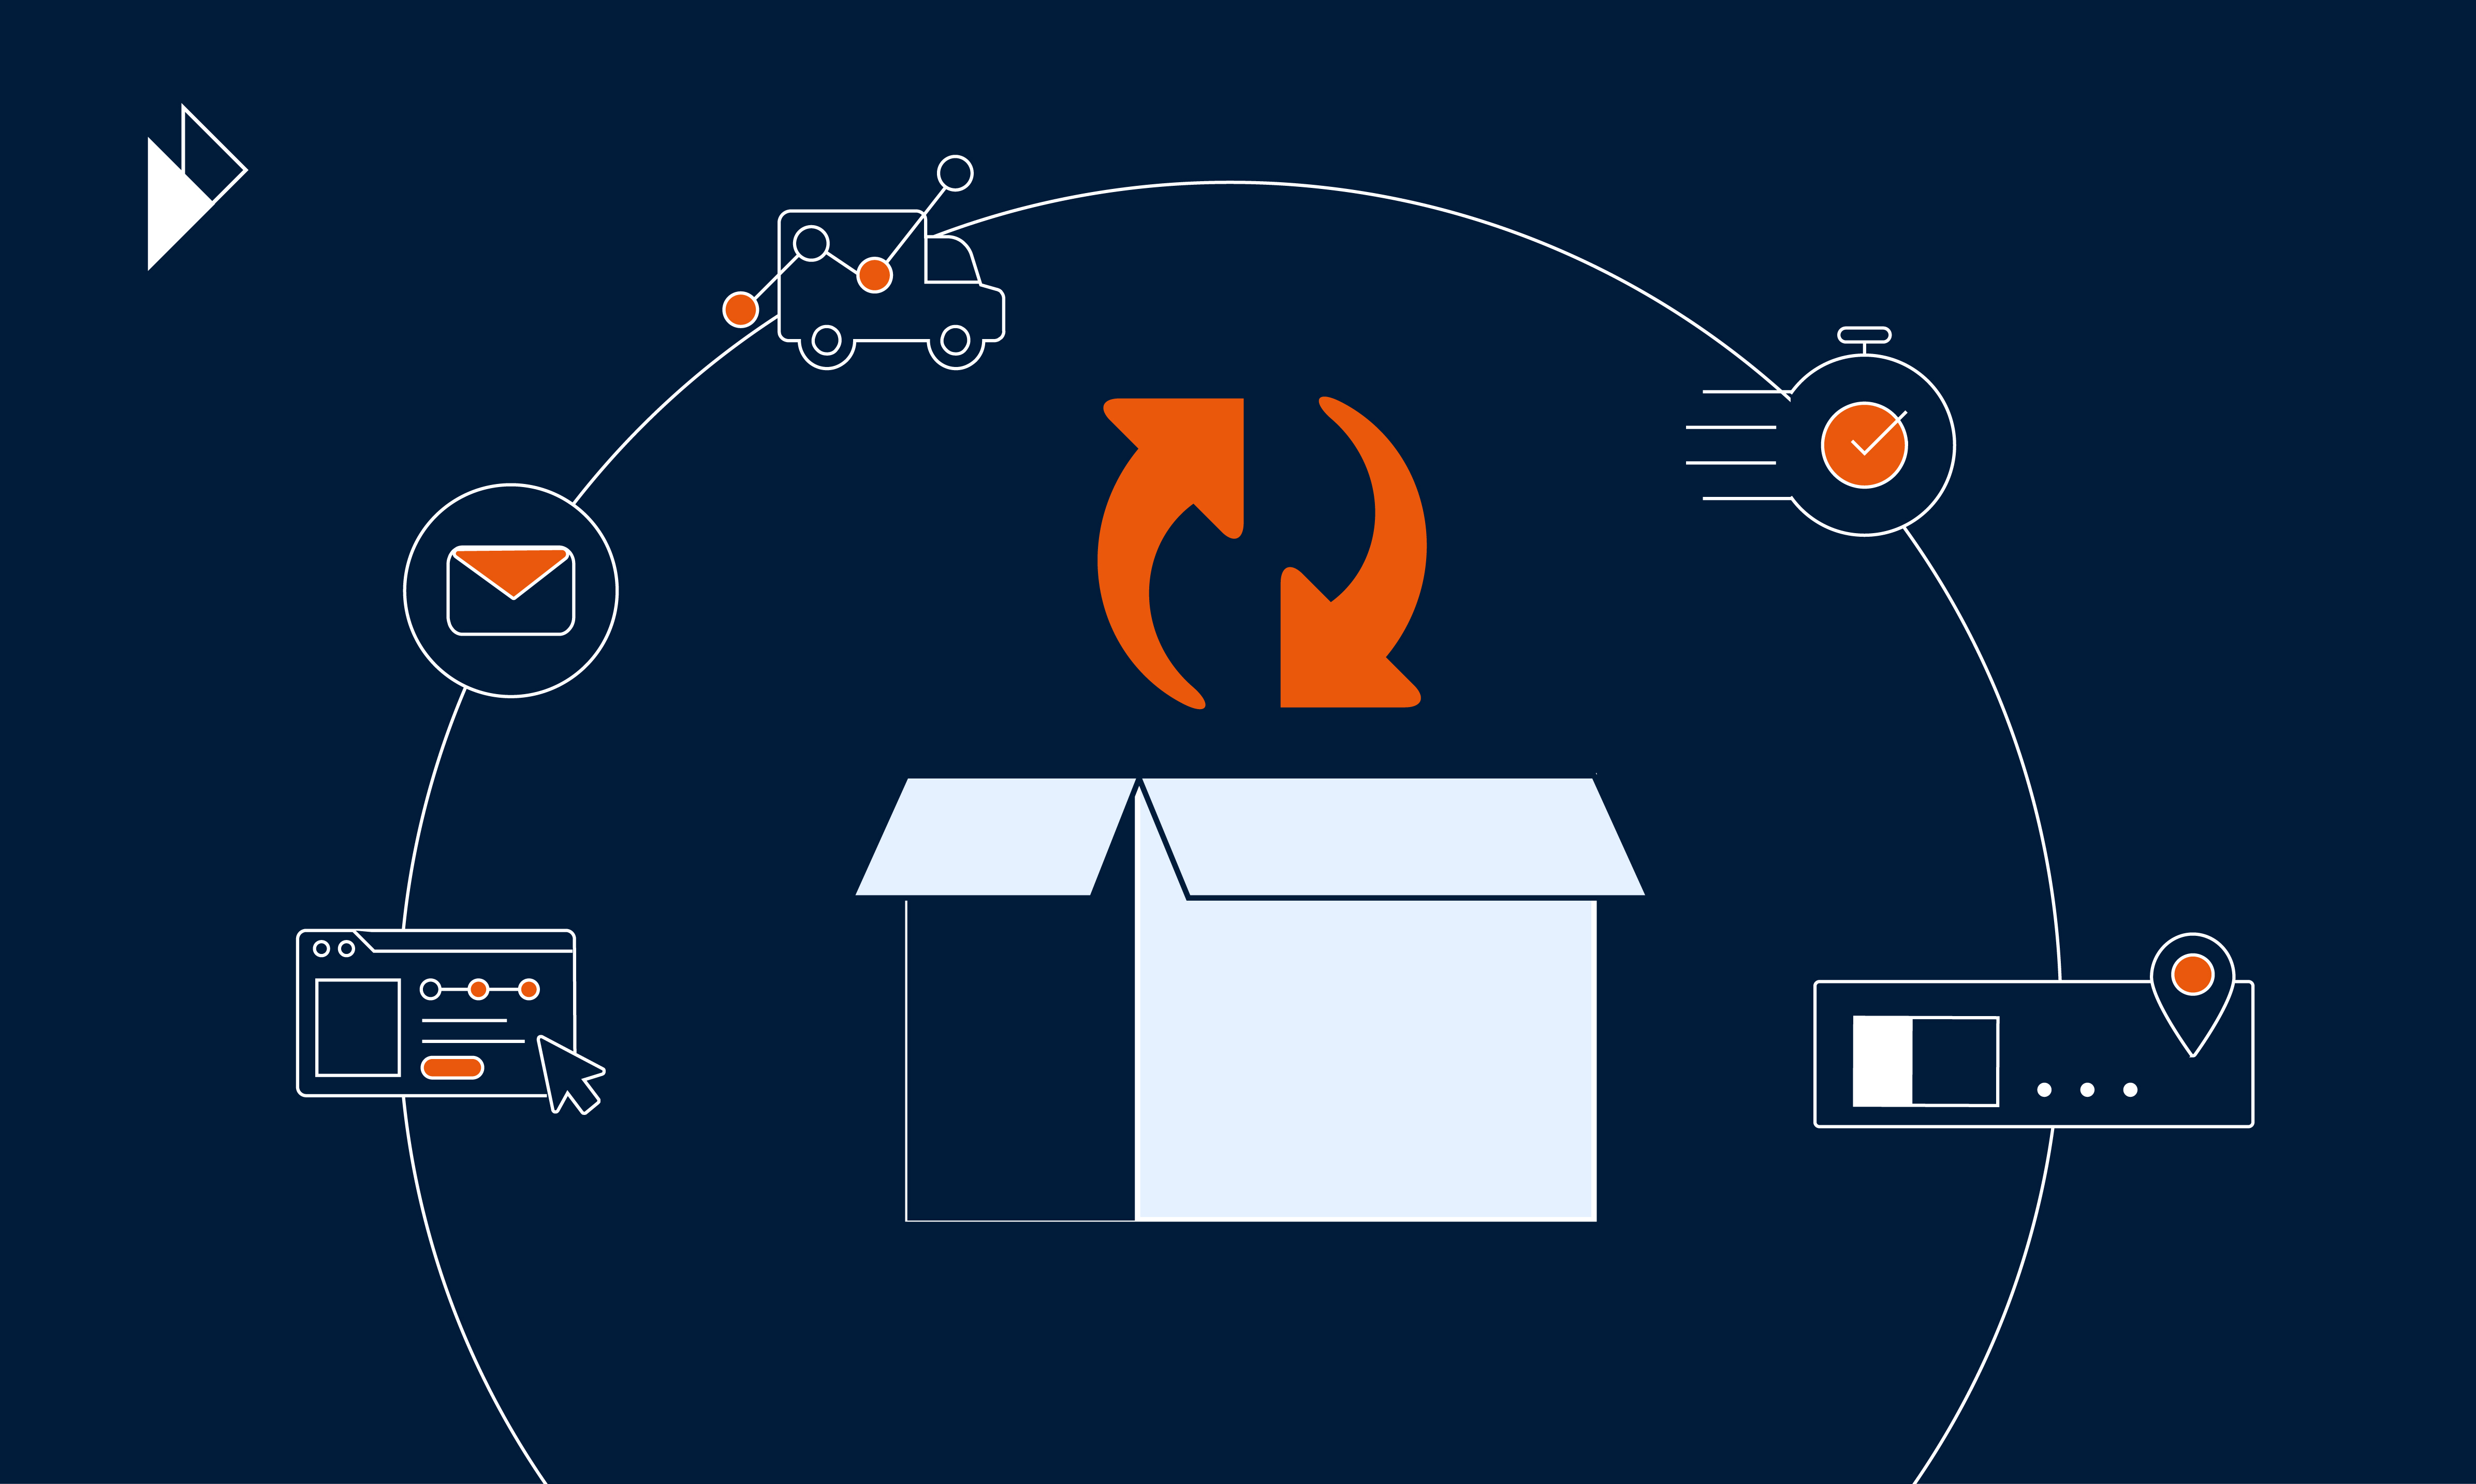 Parcel Perform can help with returns strategy. Abstract image with box, returns logo. Strategy includes multiple elements like delivery, speed, notifications, returns policy configuration. 